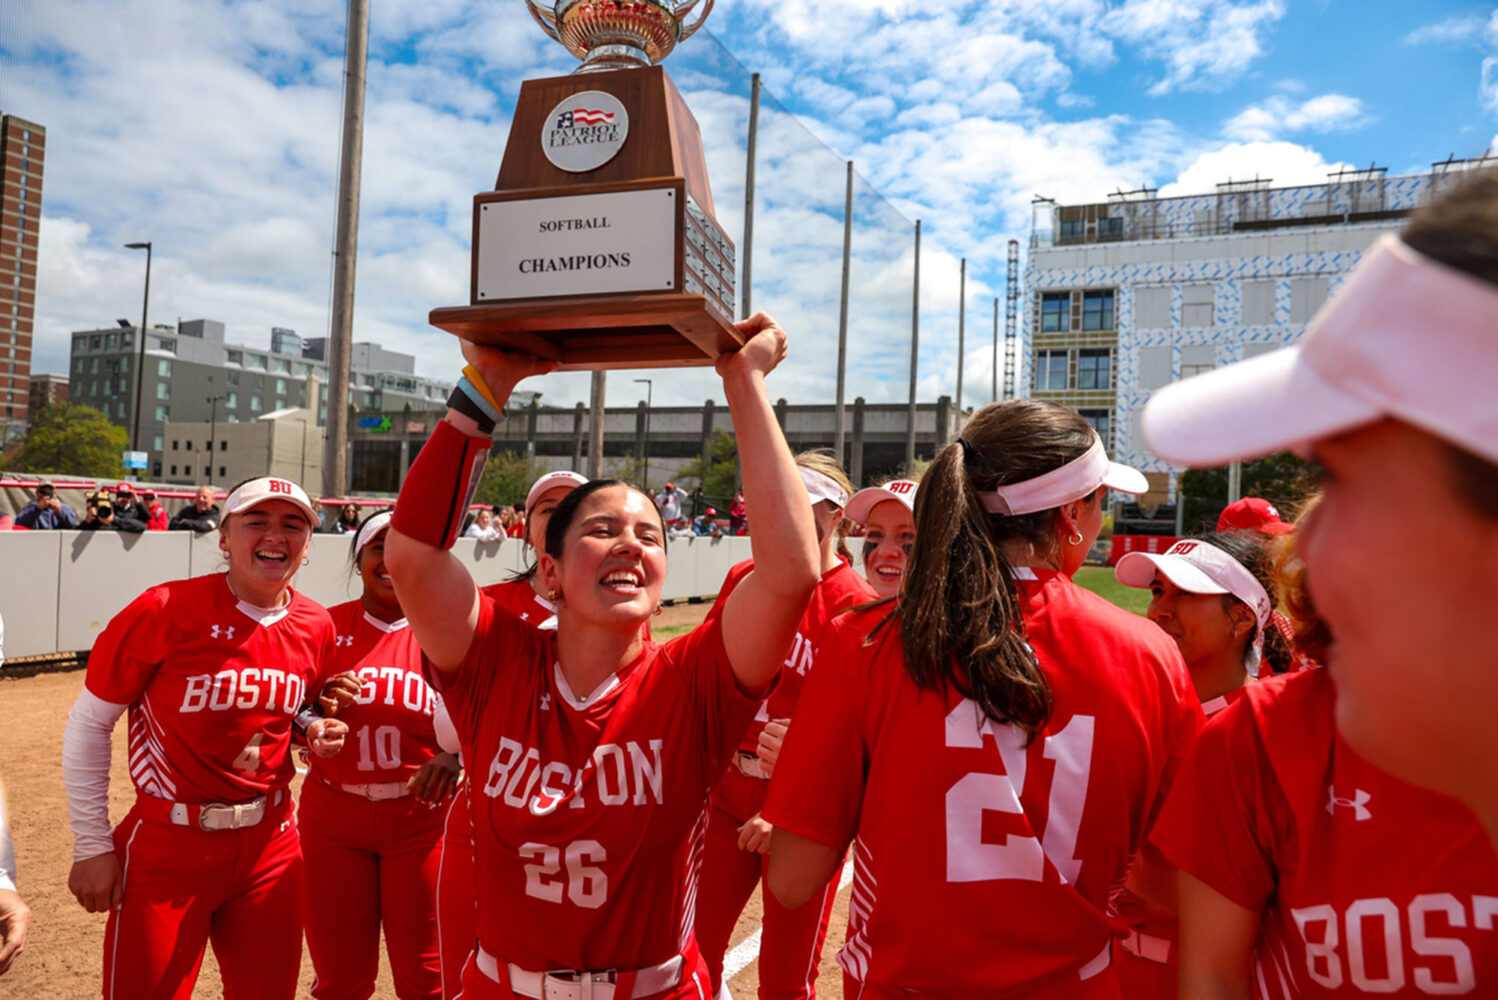 Photo: A picture of a girl in a softball uniform holding a trophy over her and her teammates' heads